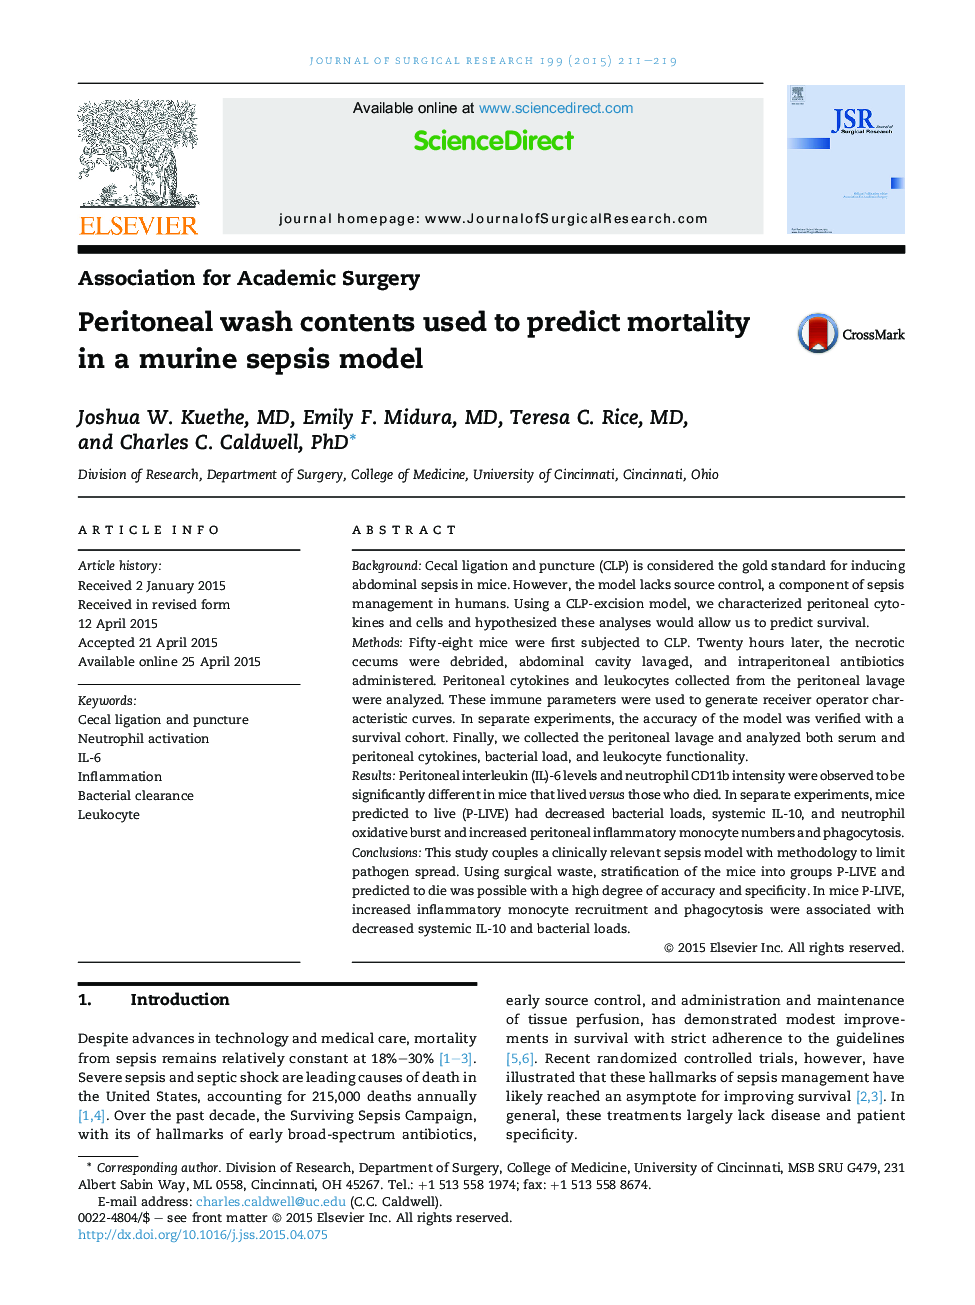 Peritoneal wash contents used to predict mortality in a murine sepsis model